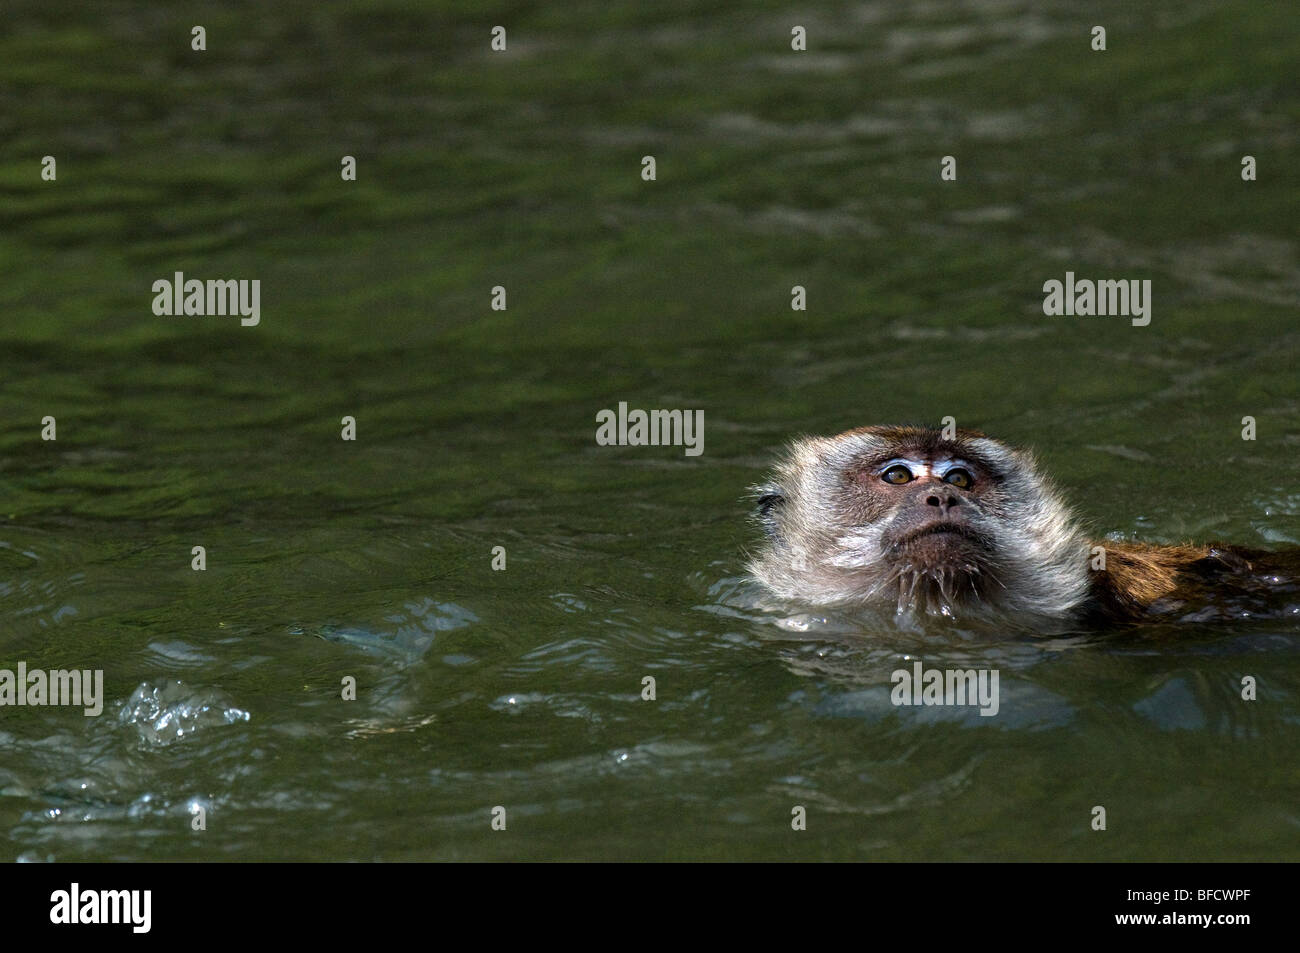 A Long-tailed or Crab-eating Macaque swimming. Stock Photo